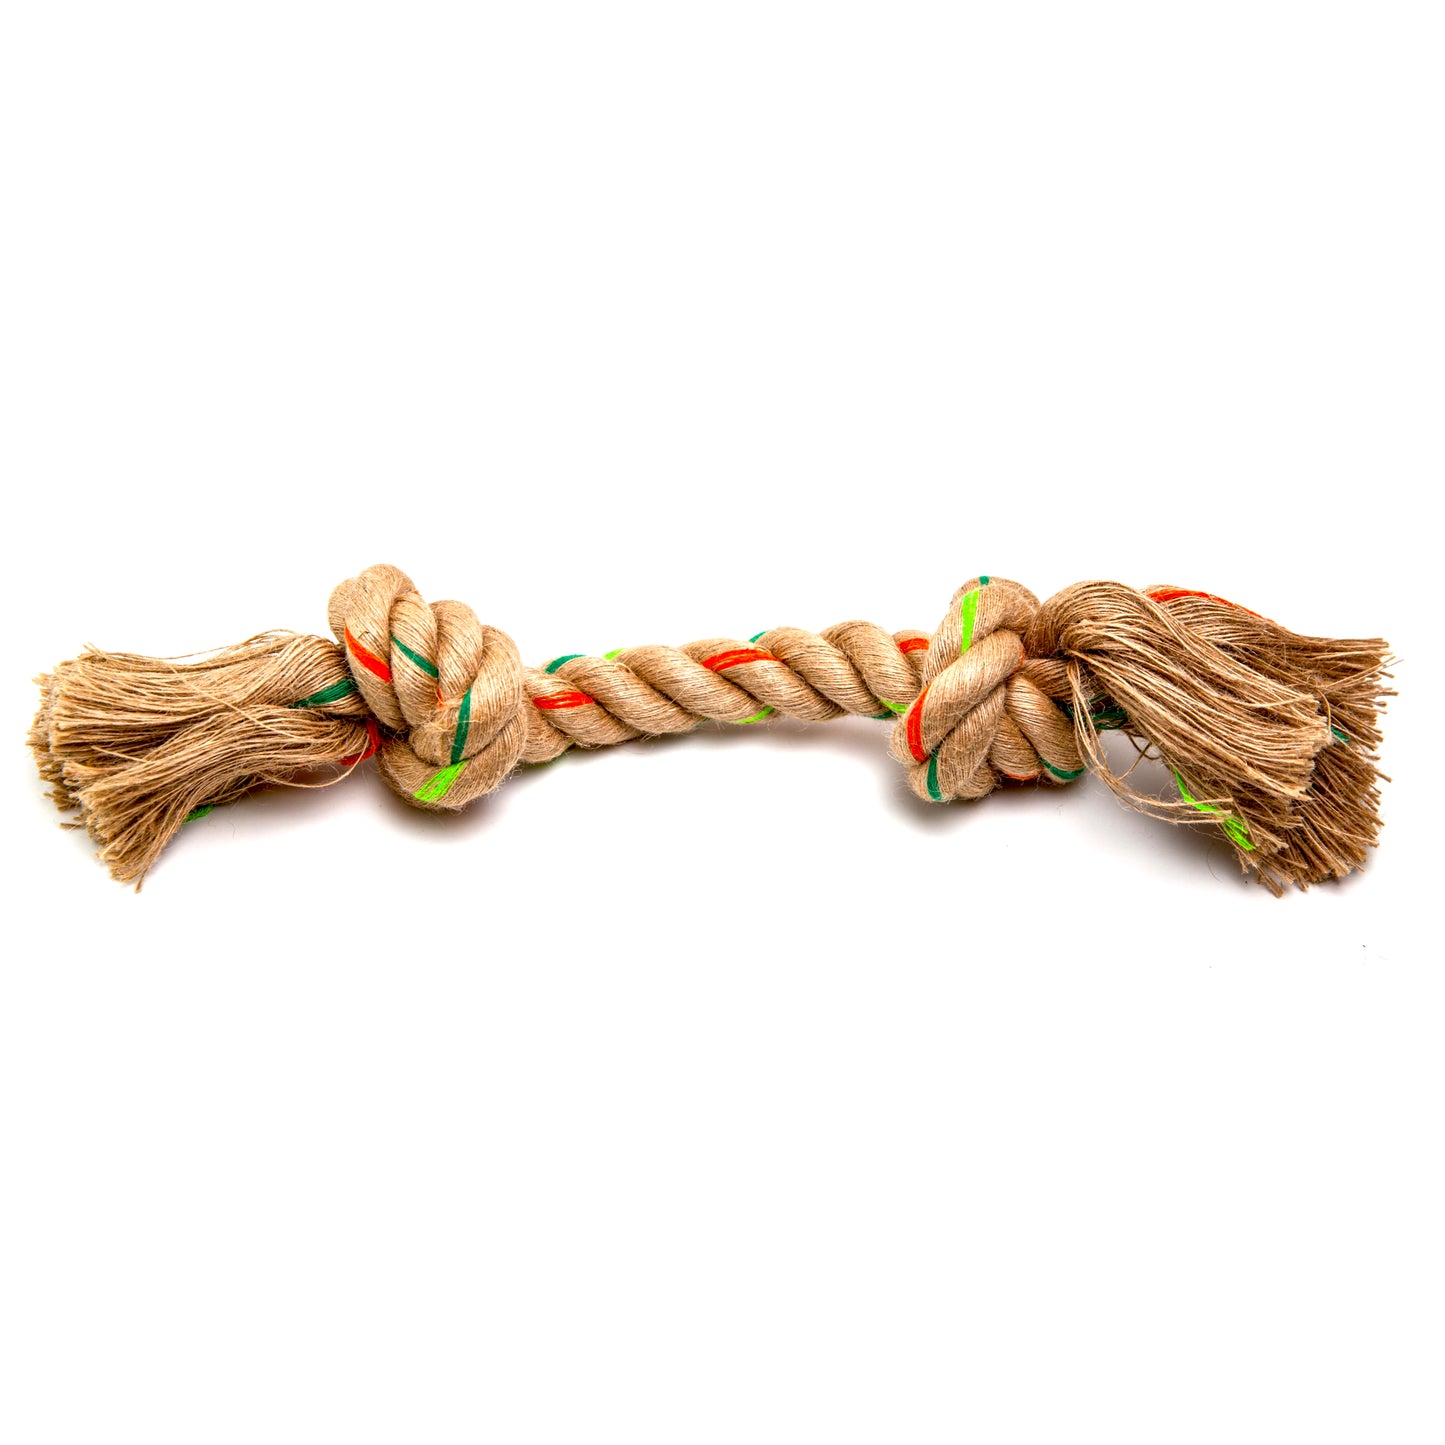 Double Knotted Hemp Rope Toys  Image